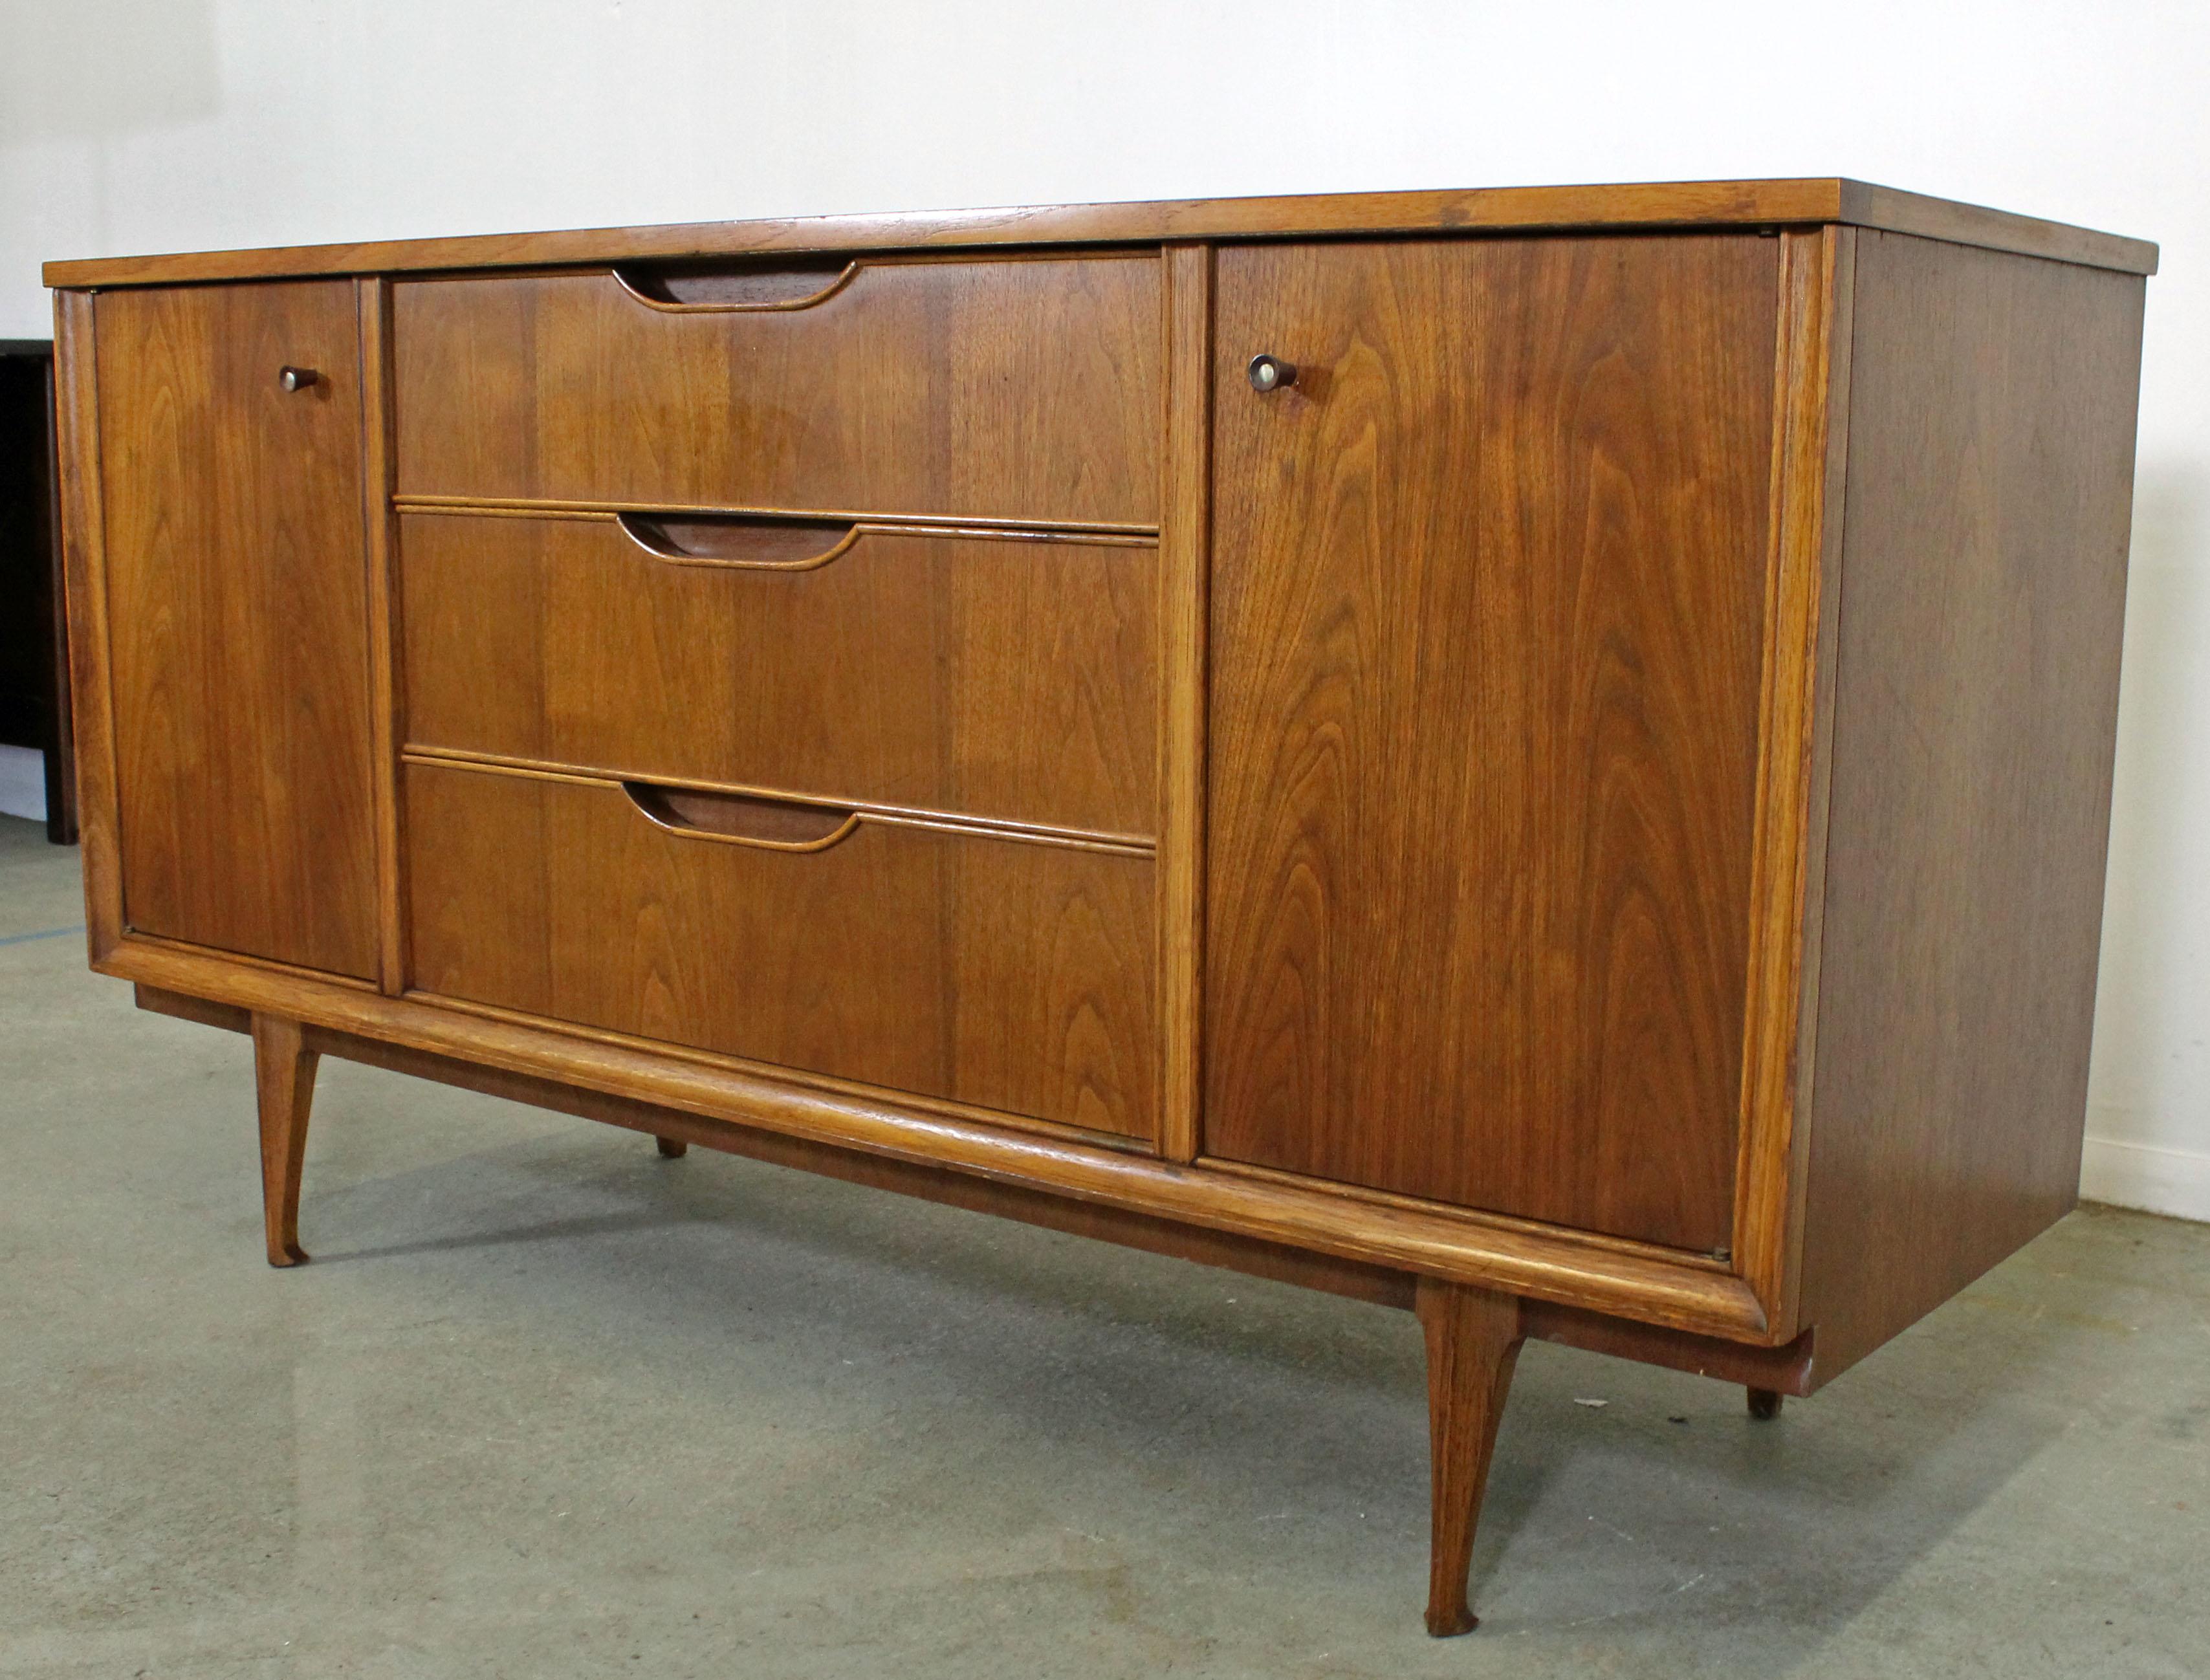 Offered is a Mid-Century Modern walnut credenza. Features two doors on both sides with storage/shelving inside, three centre drawers (top drawer has dividers), and recessed sculpted pulls. It is in good condition, shows some normal age wear (see